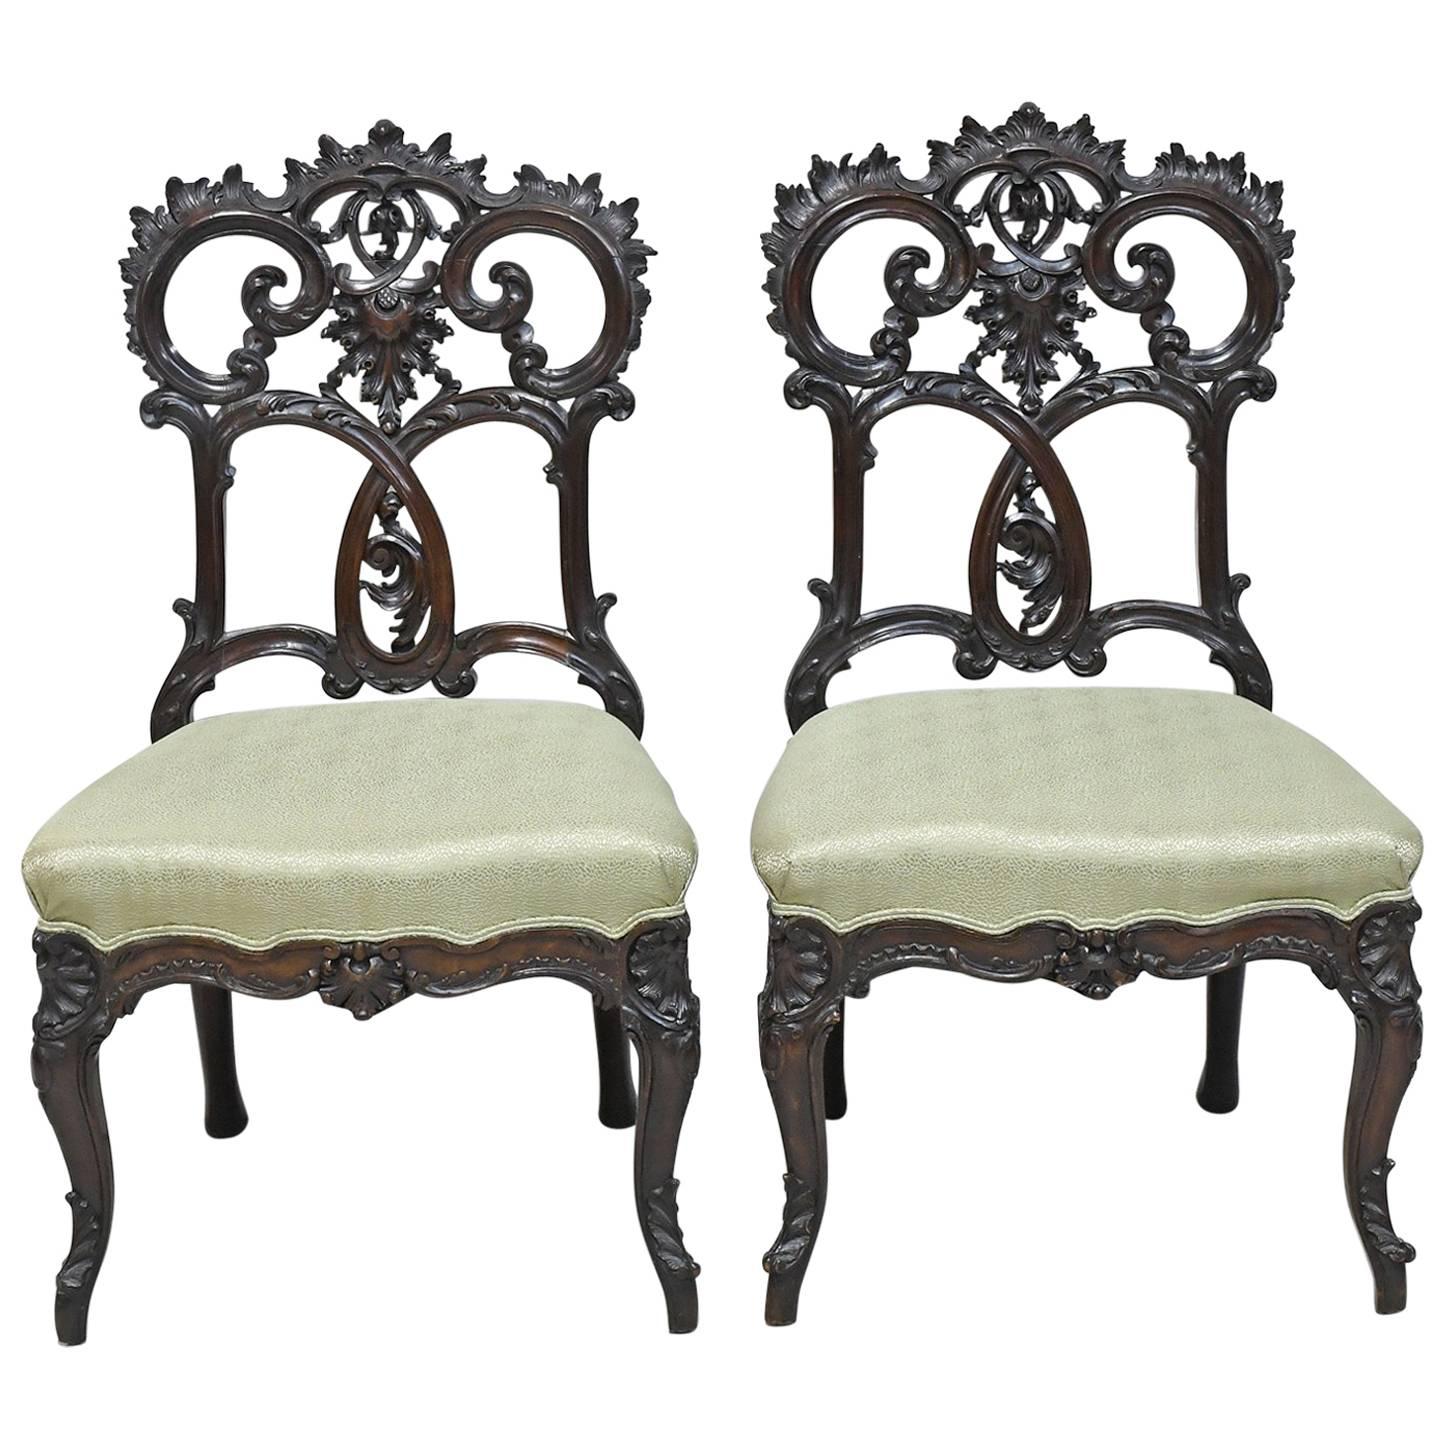 Pair of Antique American Carved Rococo Revival Chairs in Mahogany w/ Upholstery